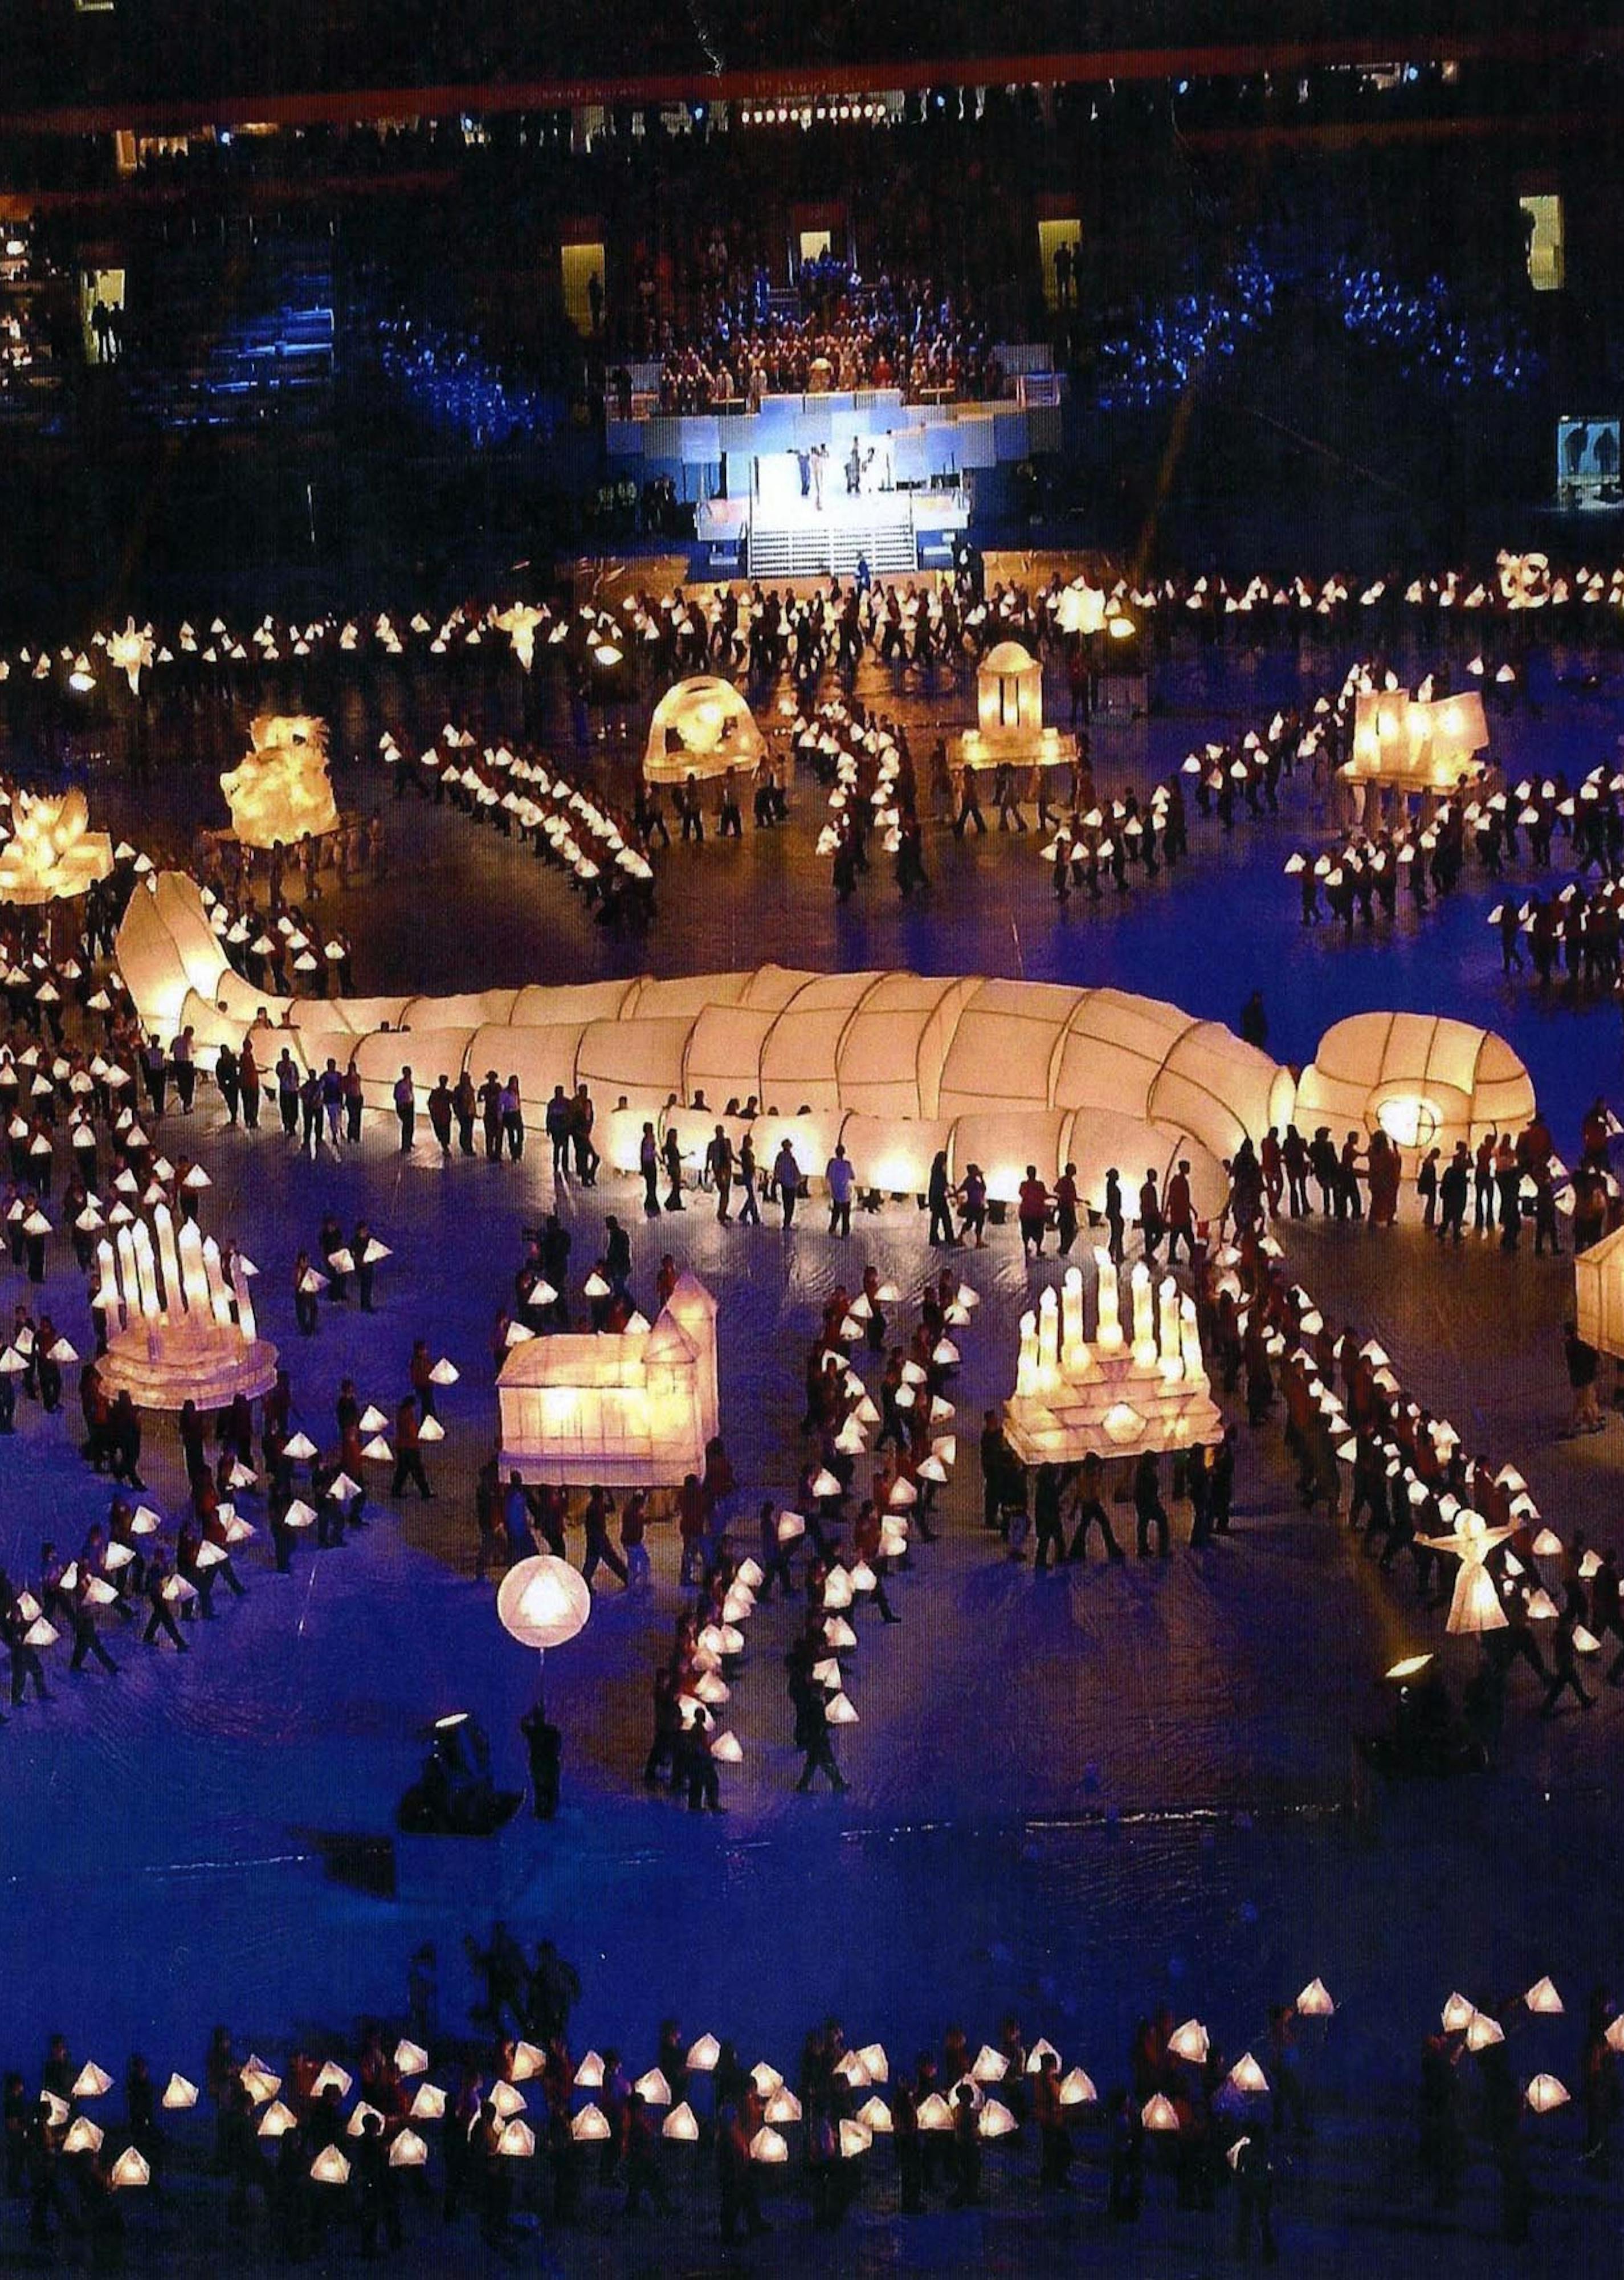 A large lantern shaped like a person lying in the centre of an arena, it is surrounded by hundreds of tiny dots of light, each a person holding a lantern